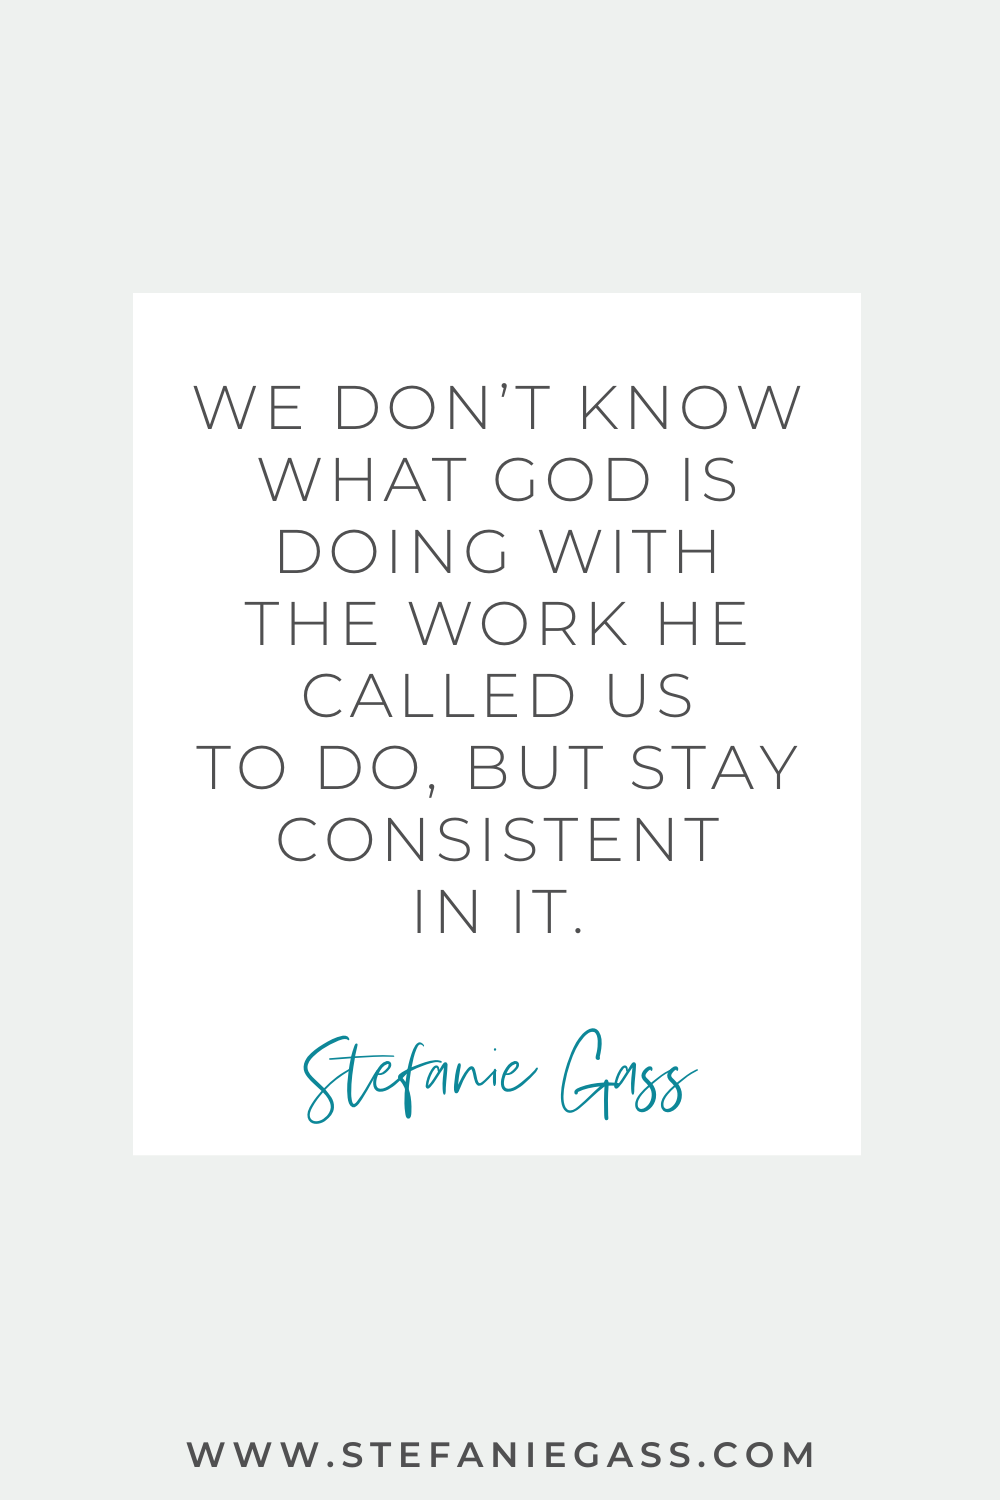 Stefanie Gass quote: We don’t know what God‘s doing with the work He called us to do, but stay consistent in it.